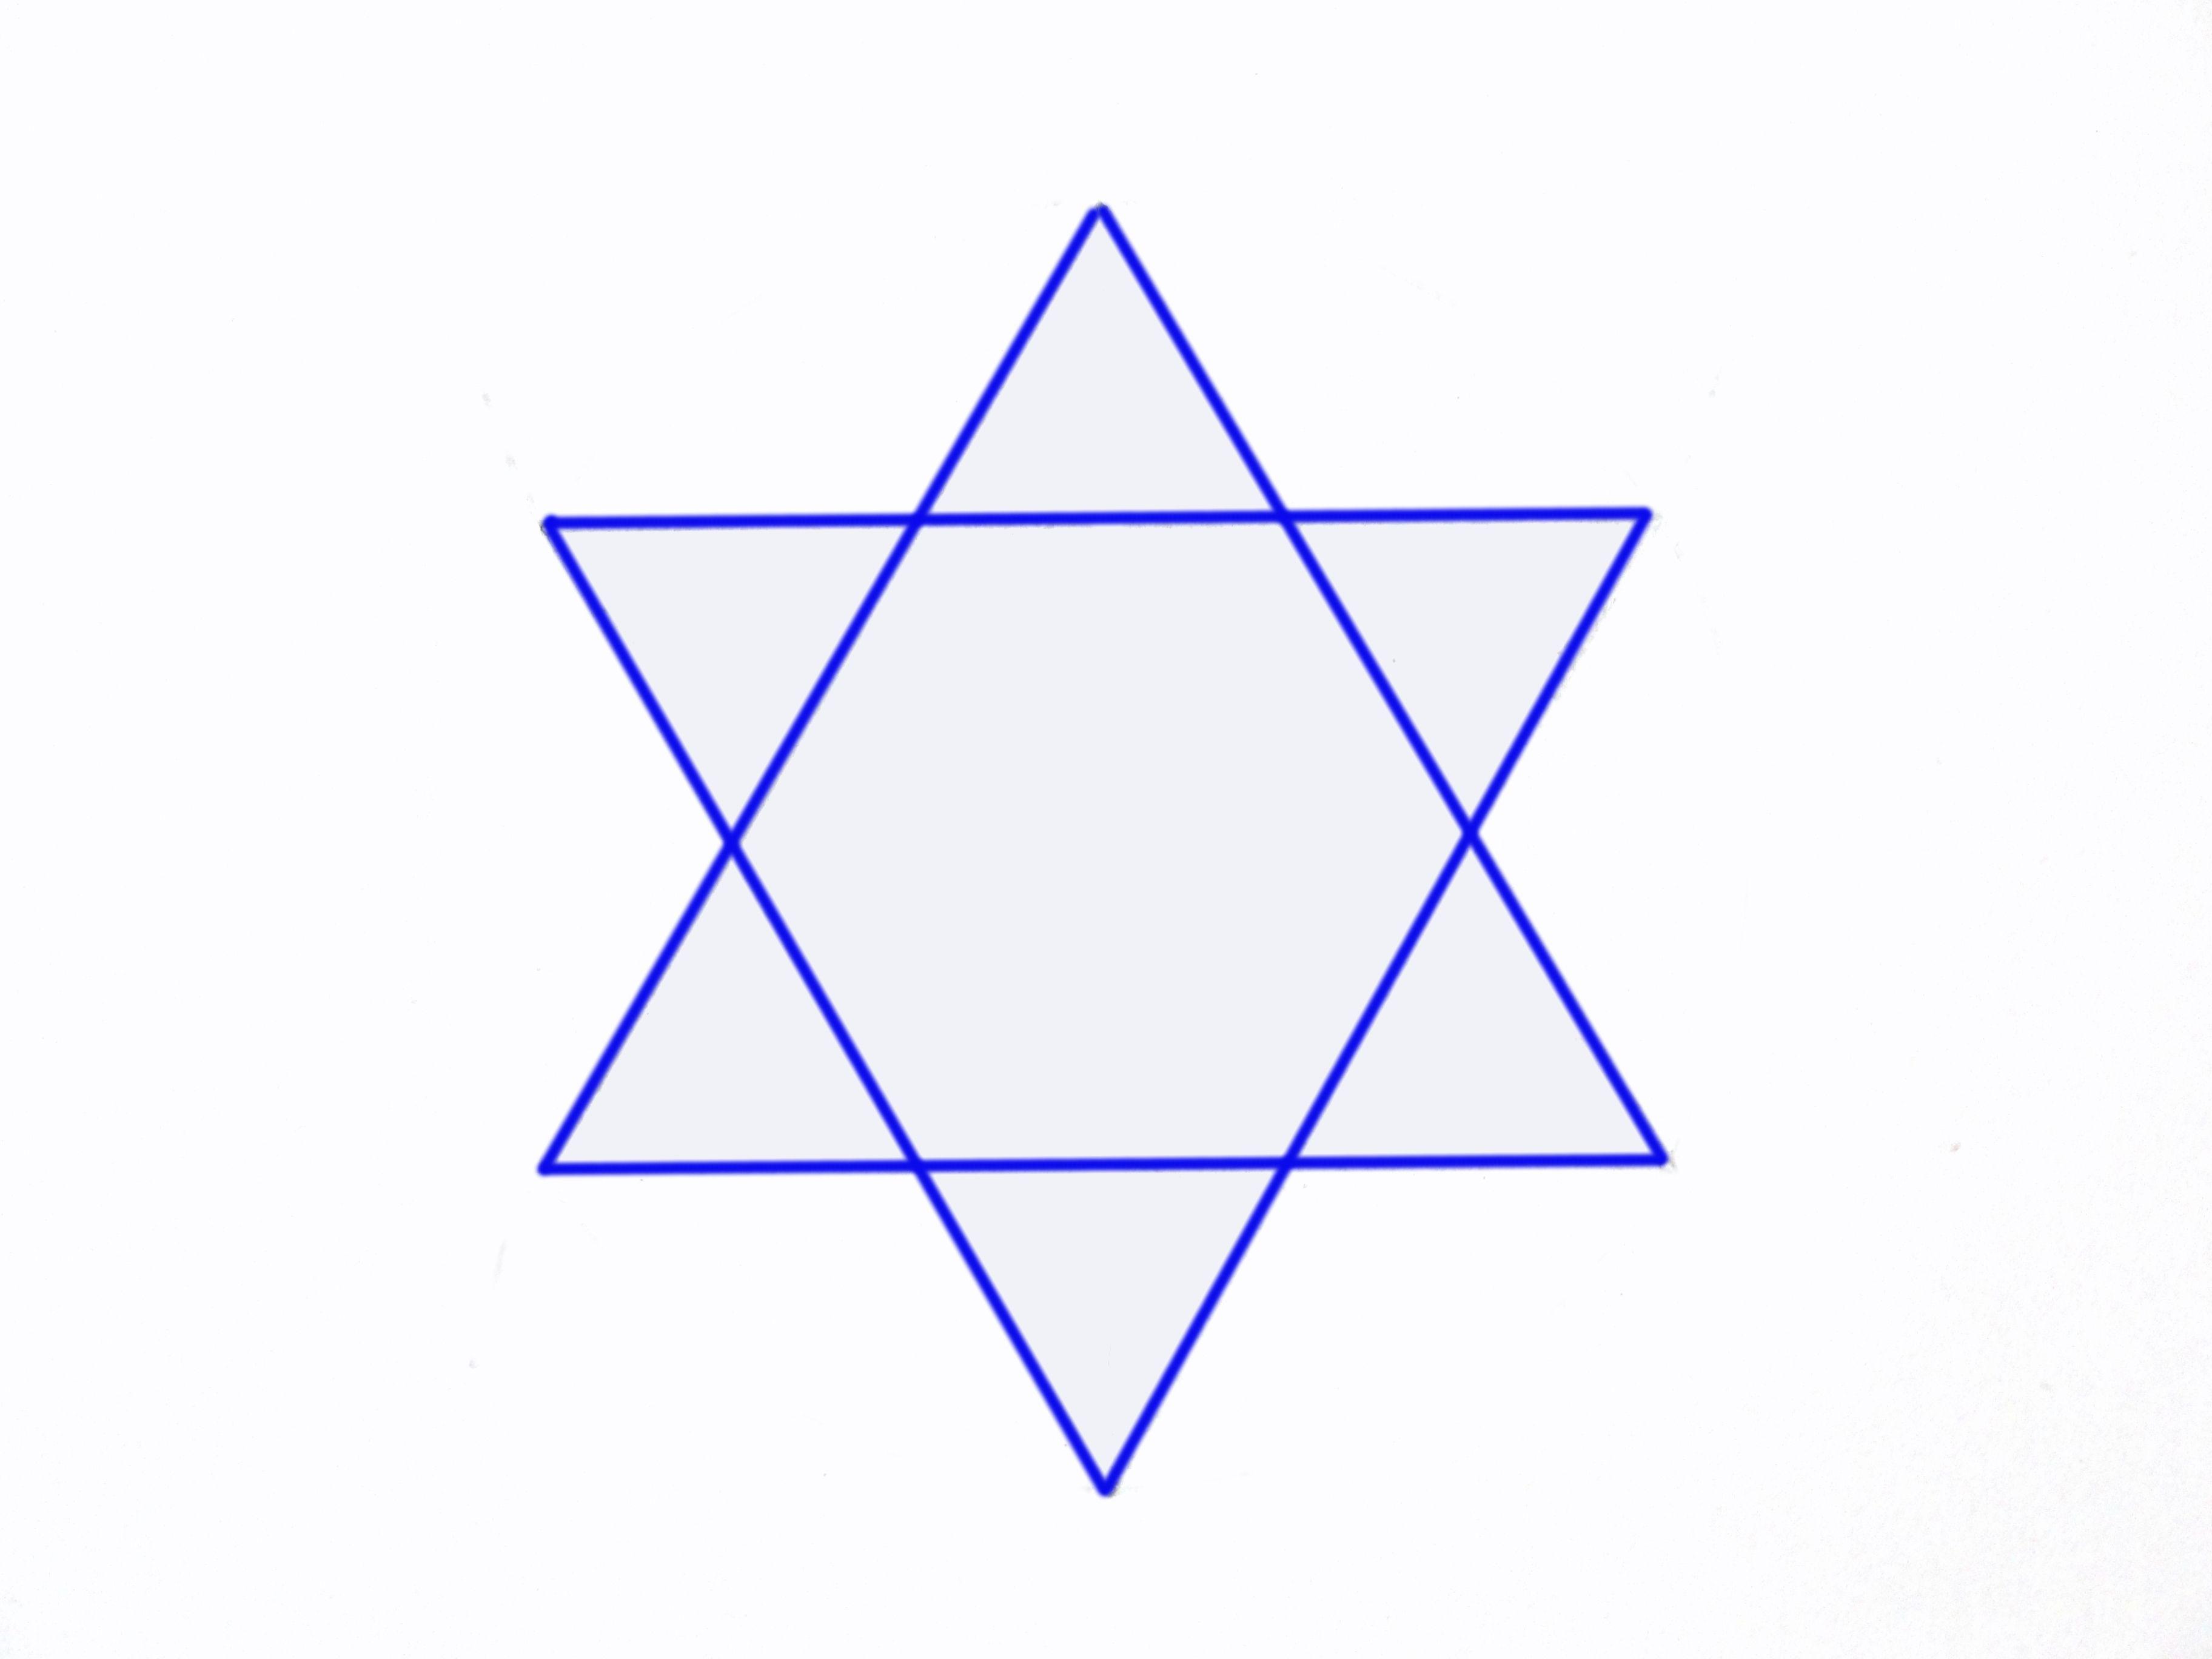 Star of David Logo - How to Create the Star of David Using a Pencil, Ruler and Compass